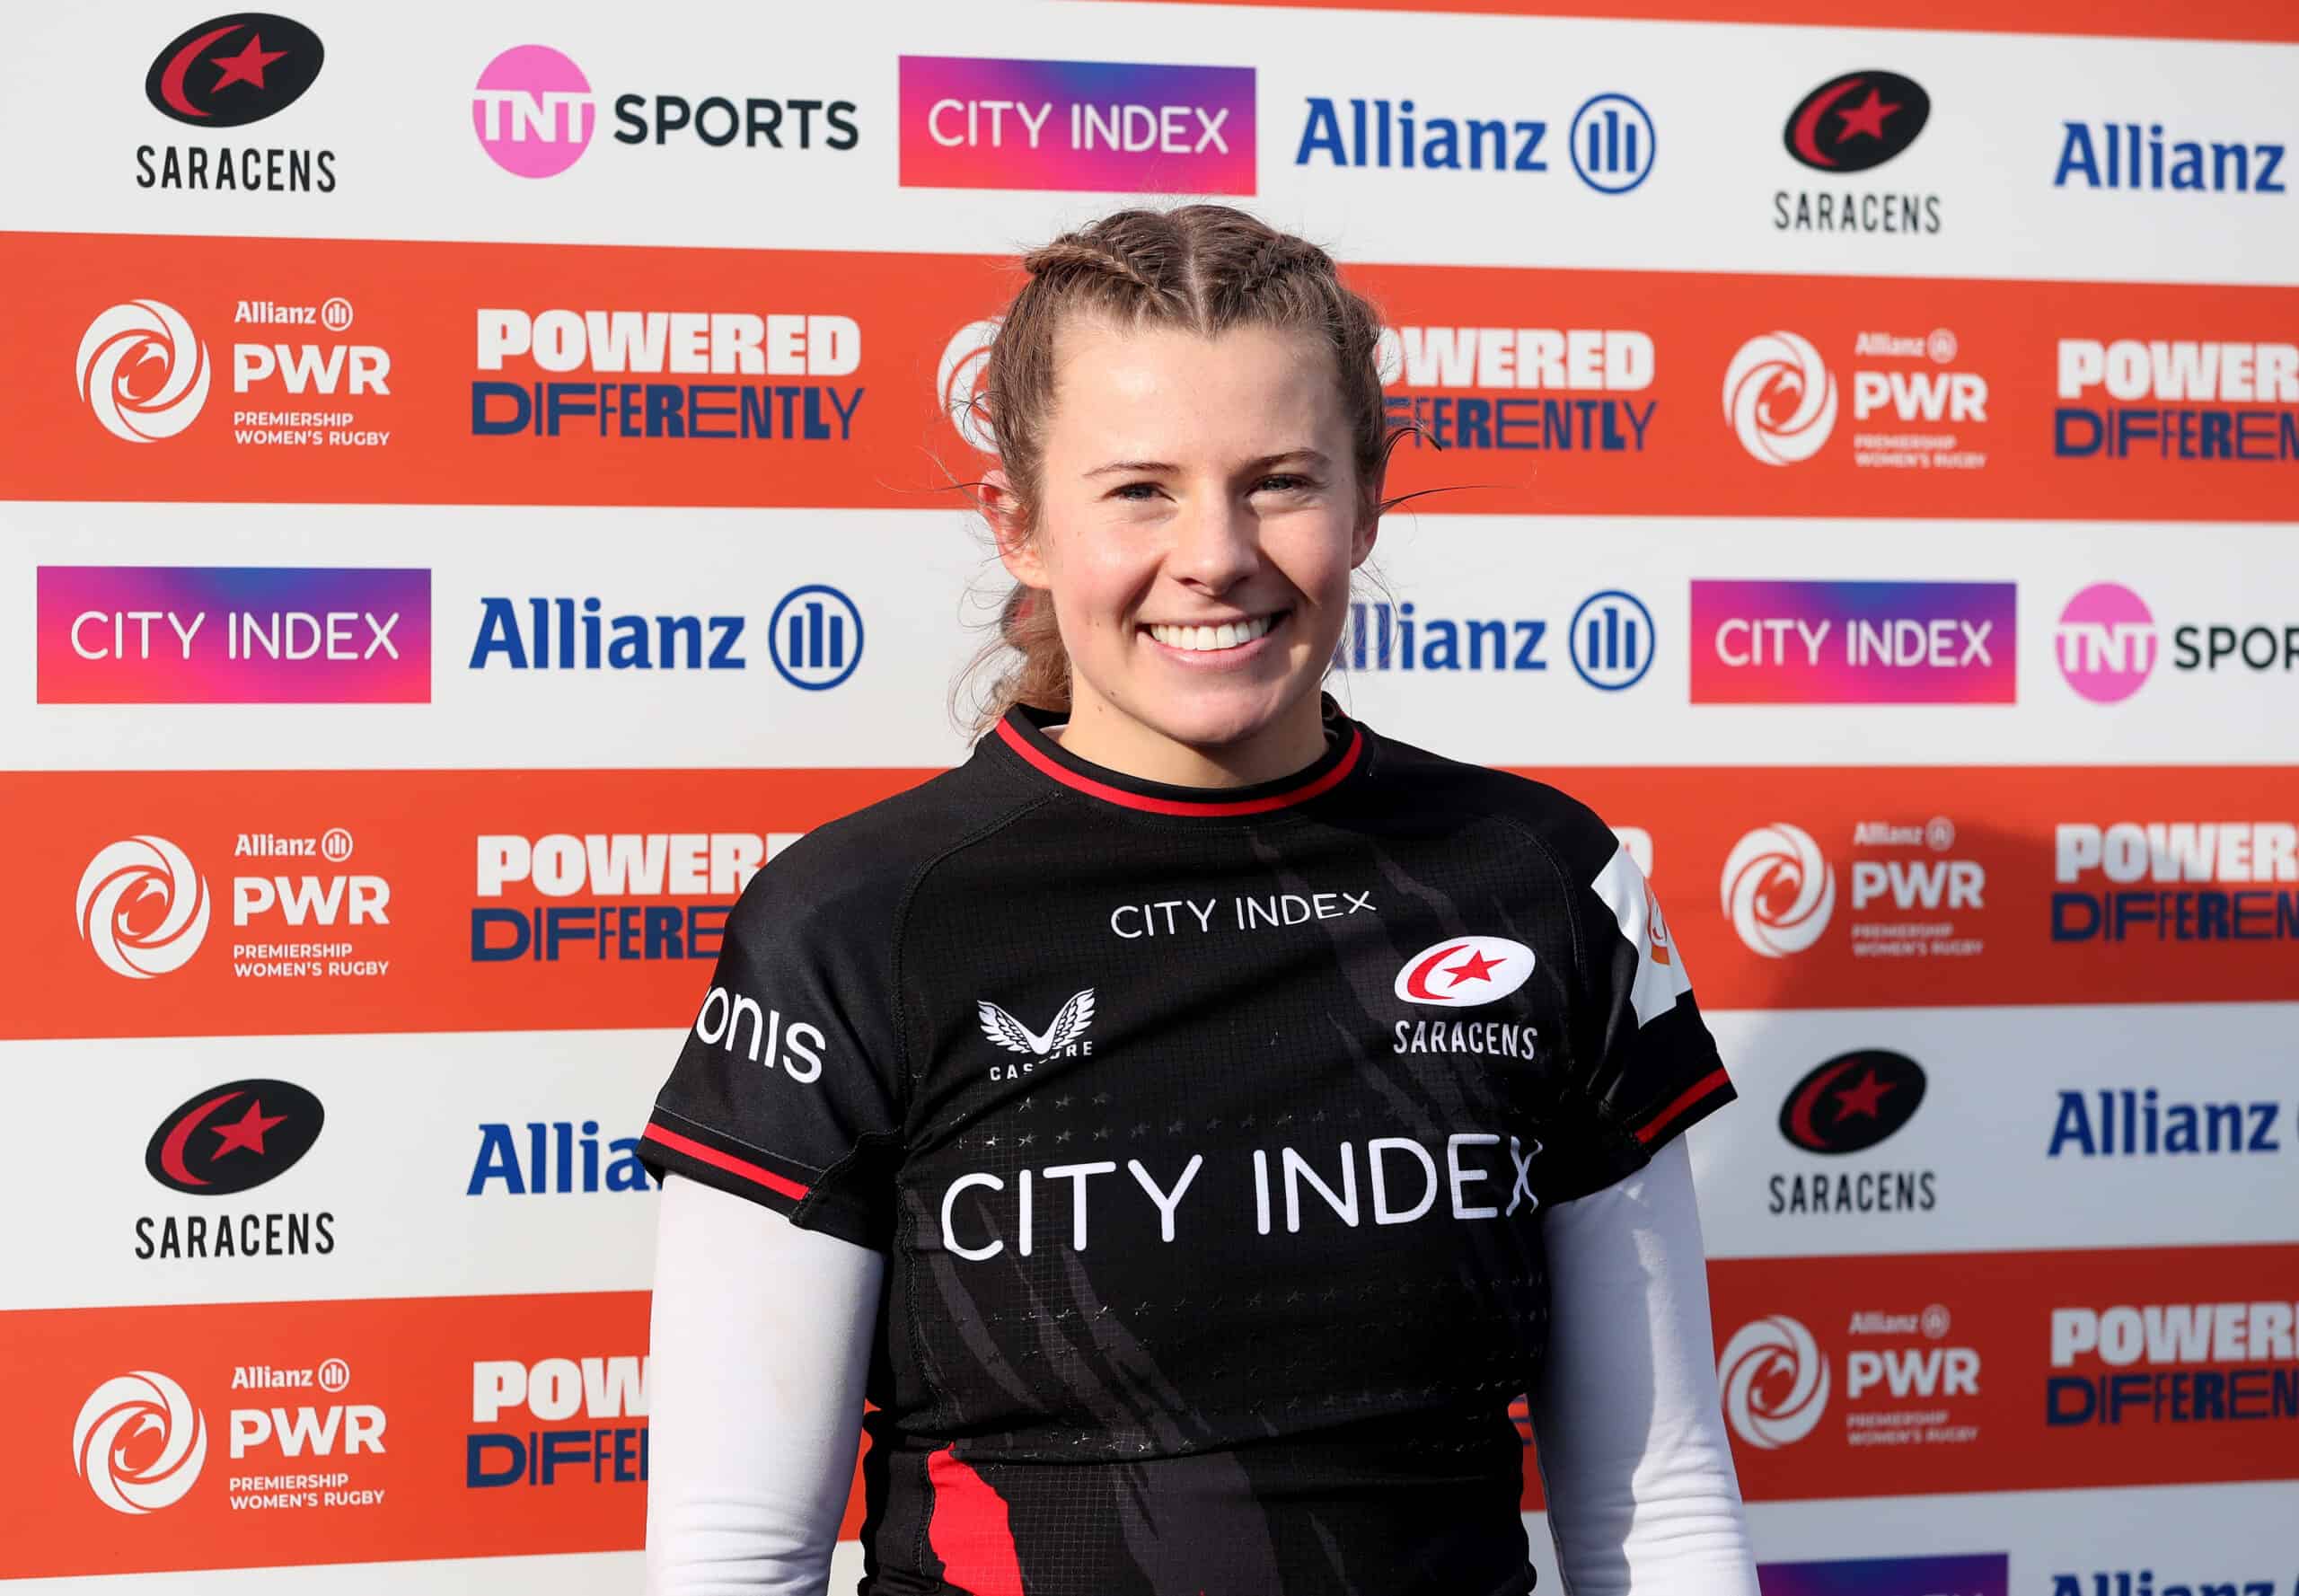 Saracens V Leicester Tigers Allianz Premiership Women's Rugby